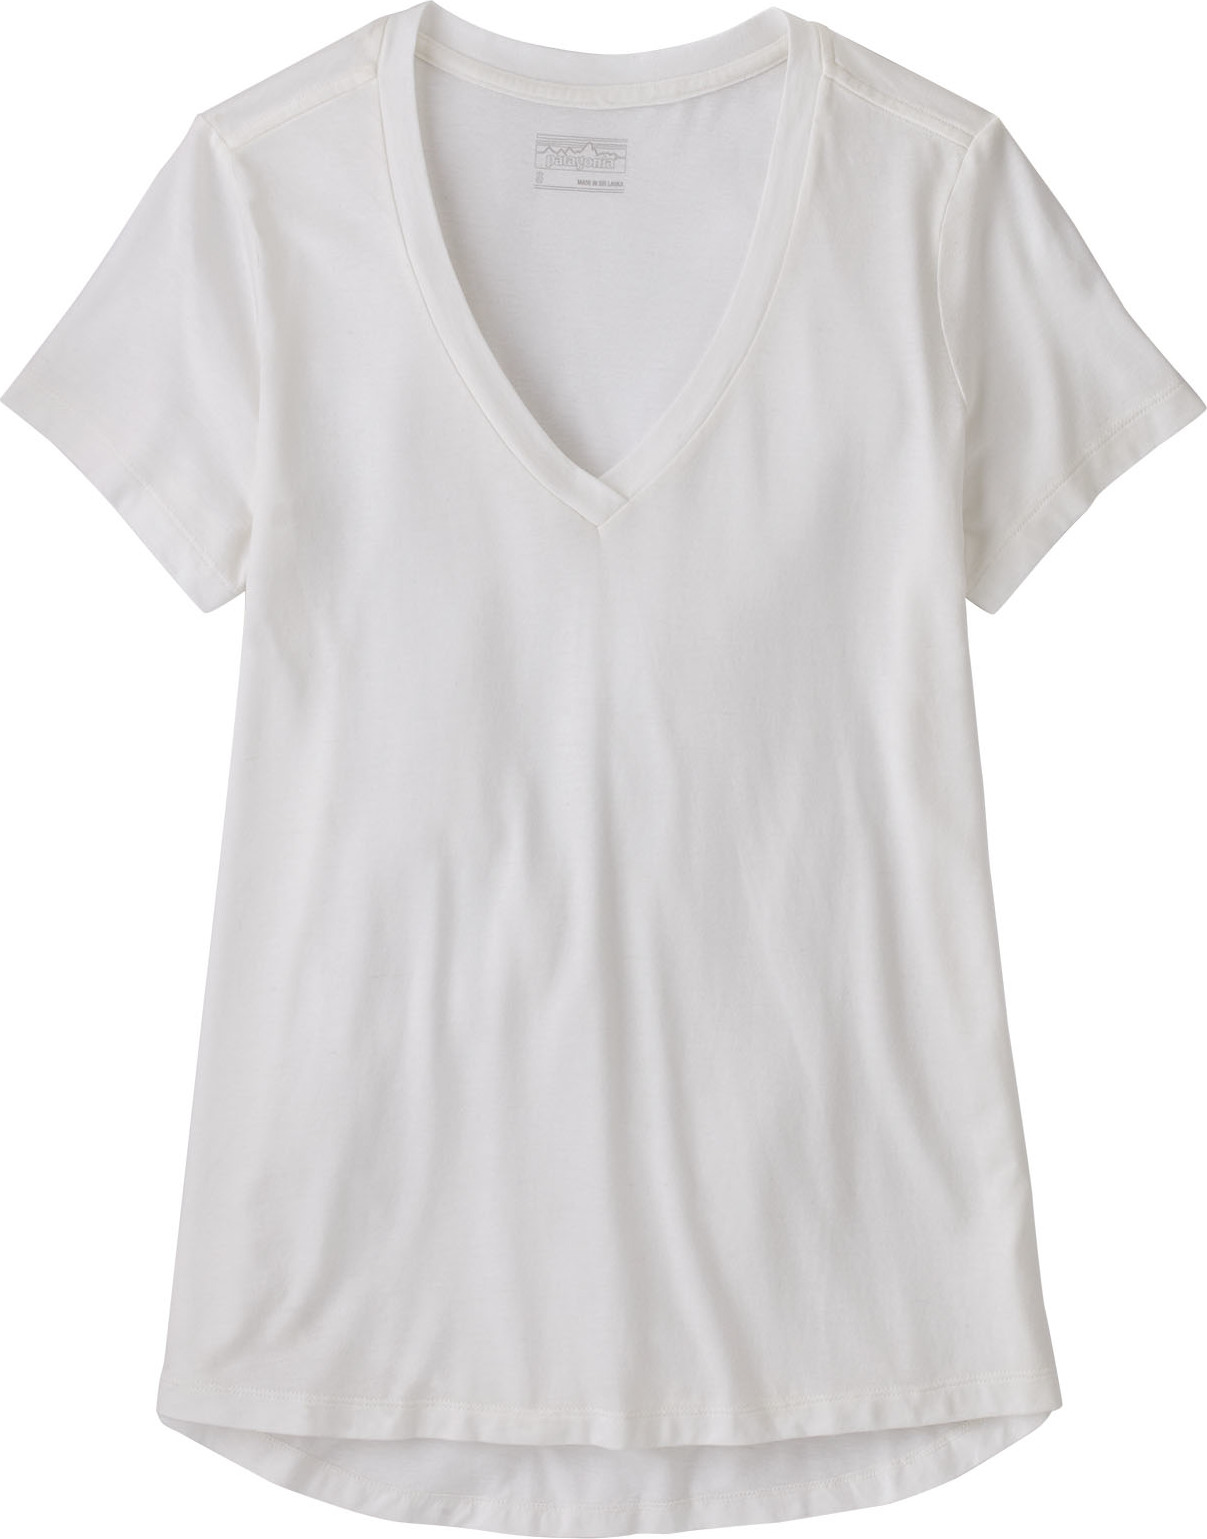 Women's Side Current Tee White